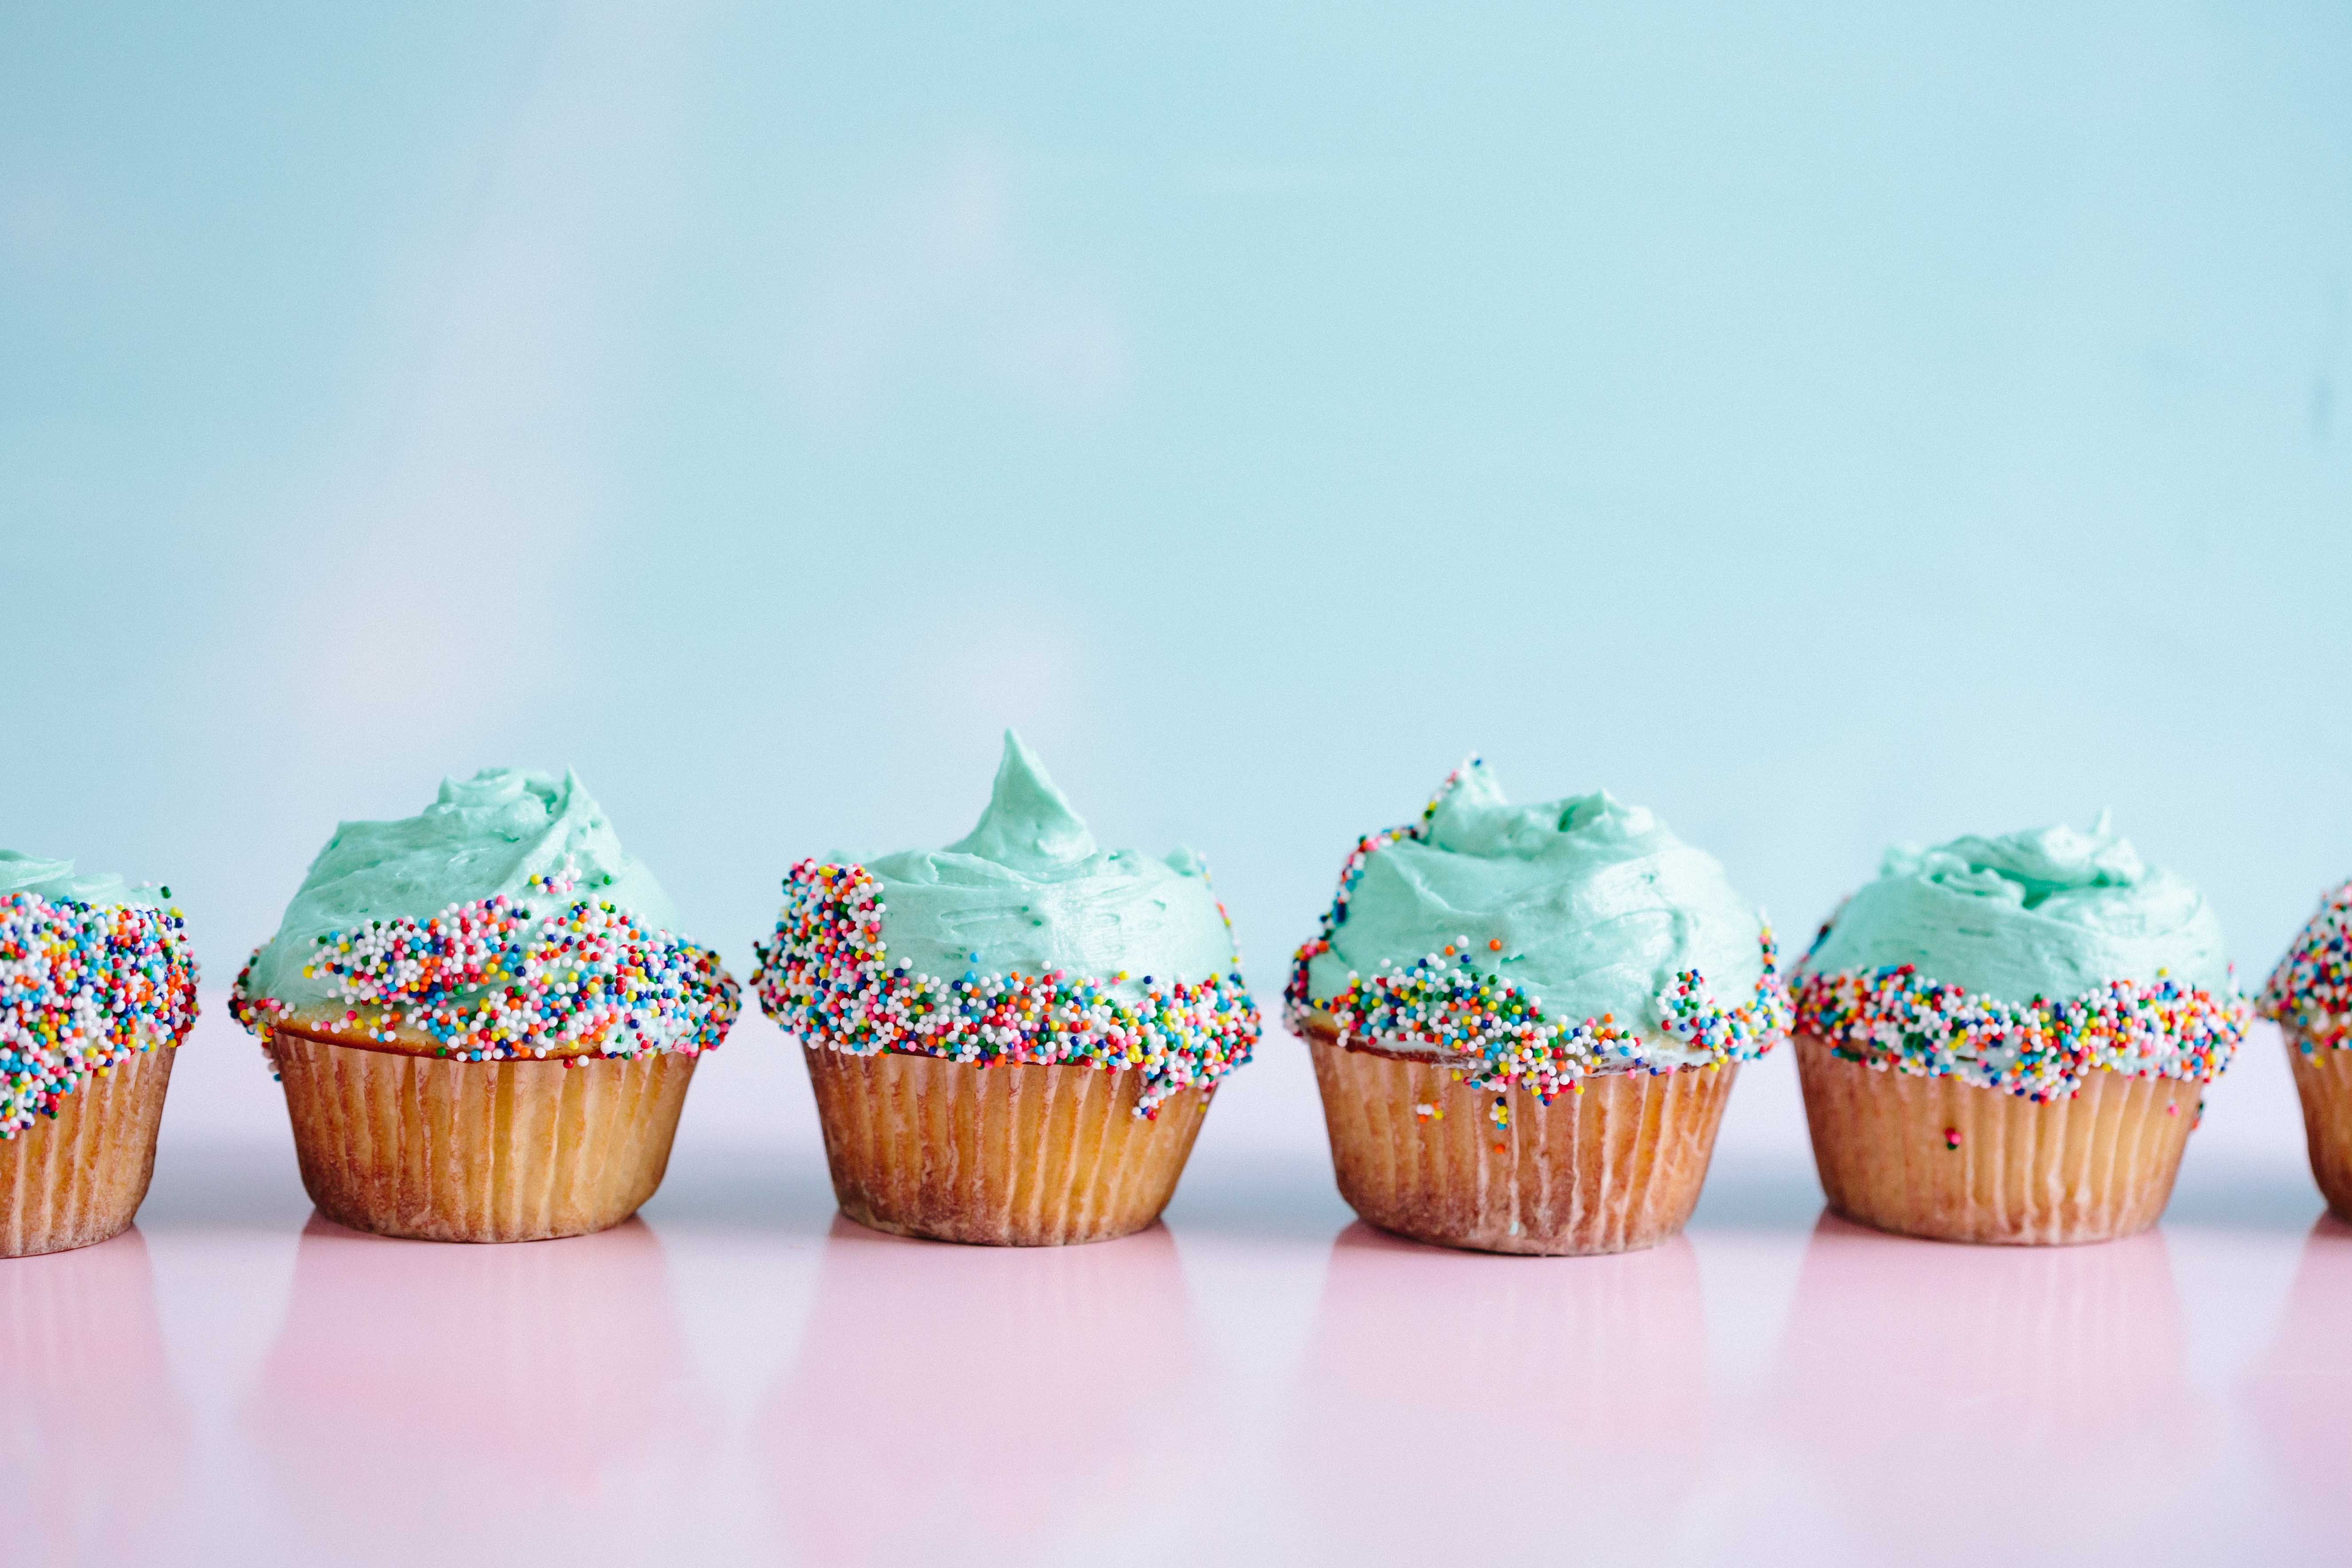 Cupcakes in a row with blue frosting and colorful sprinkles on a blue background.